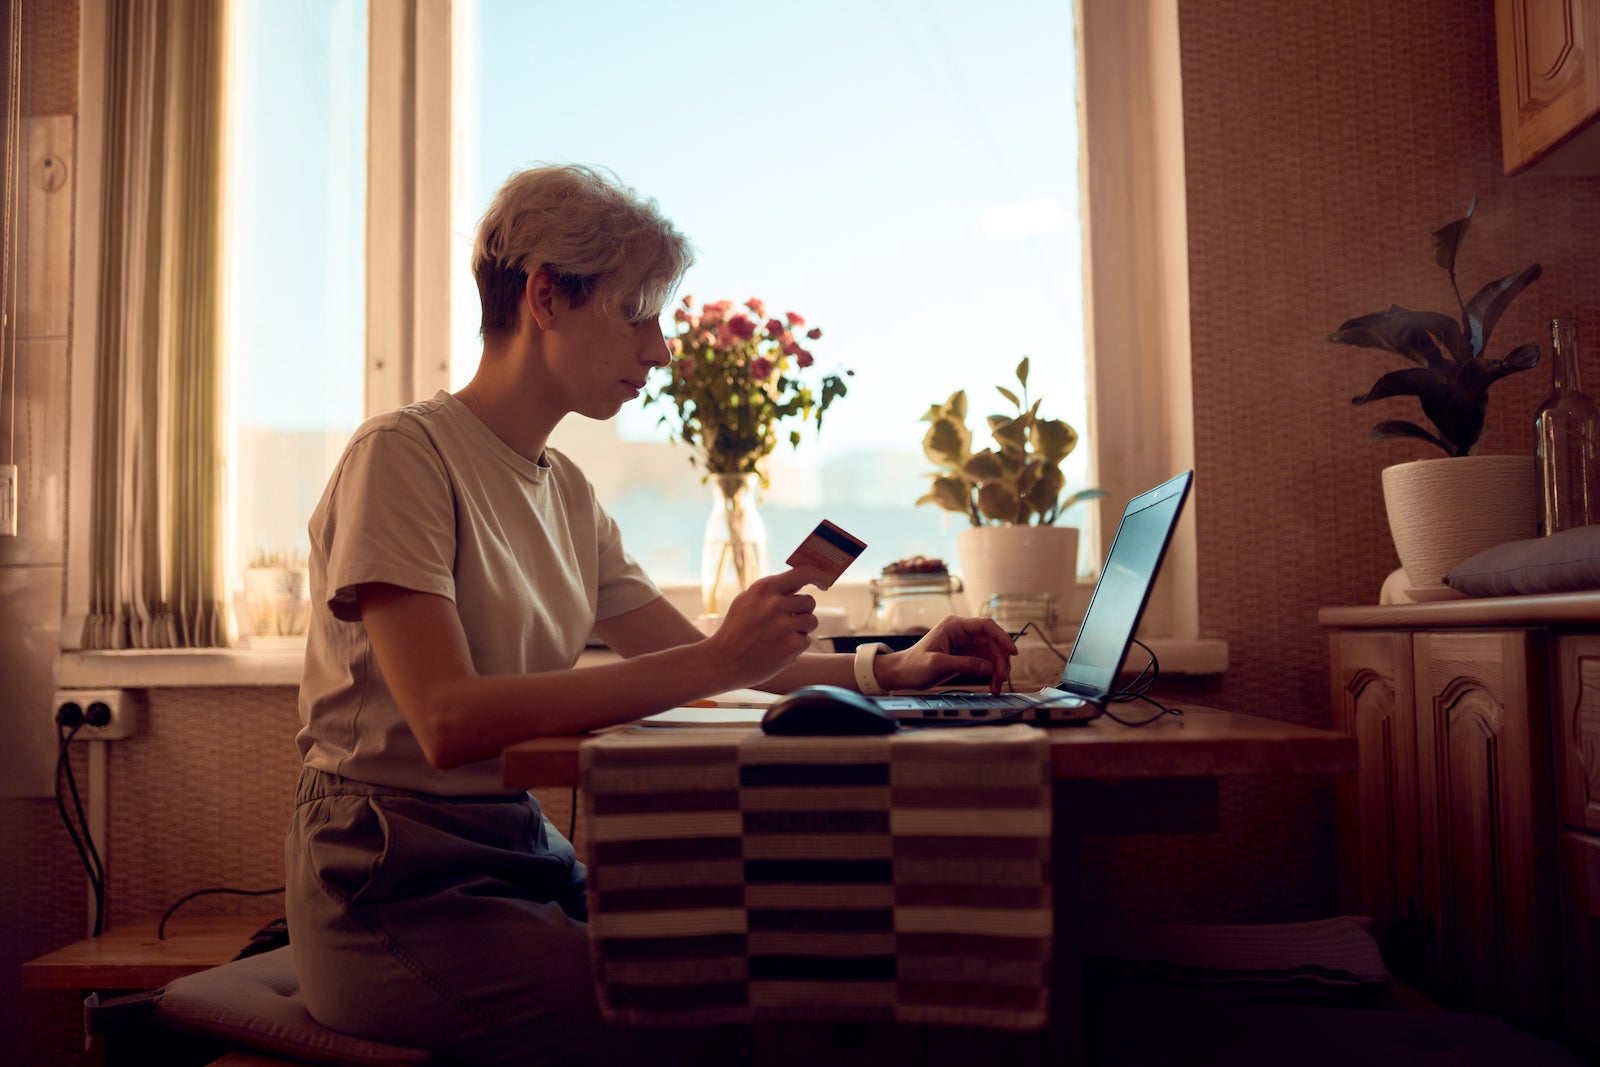 a person sits at a small table near a window, holding a credit card and reading information on a laptop